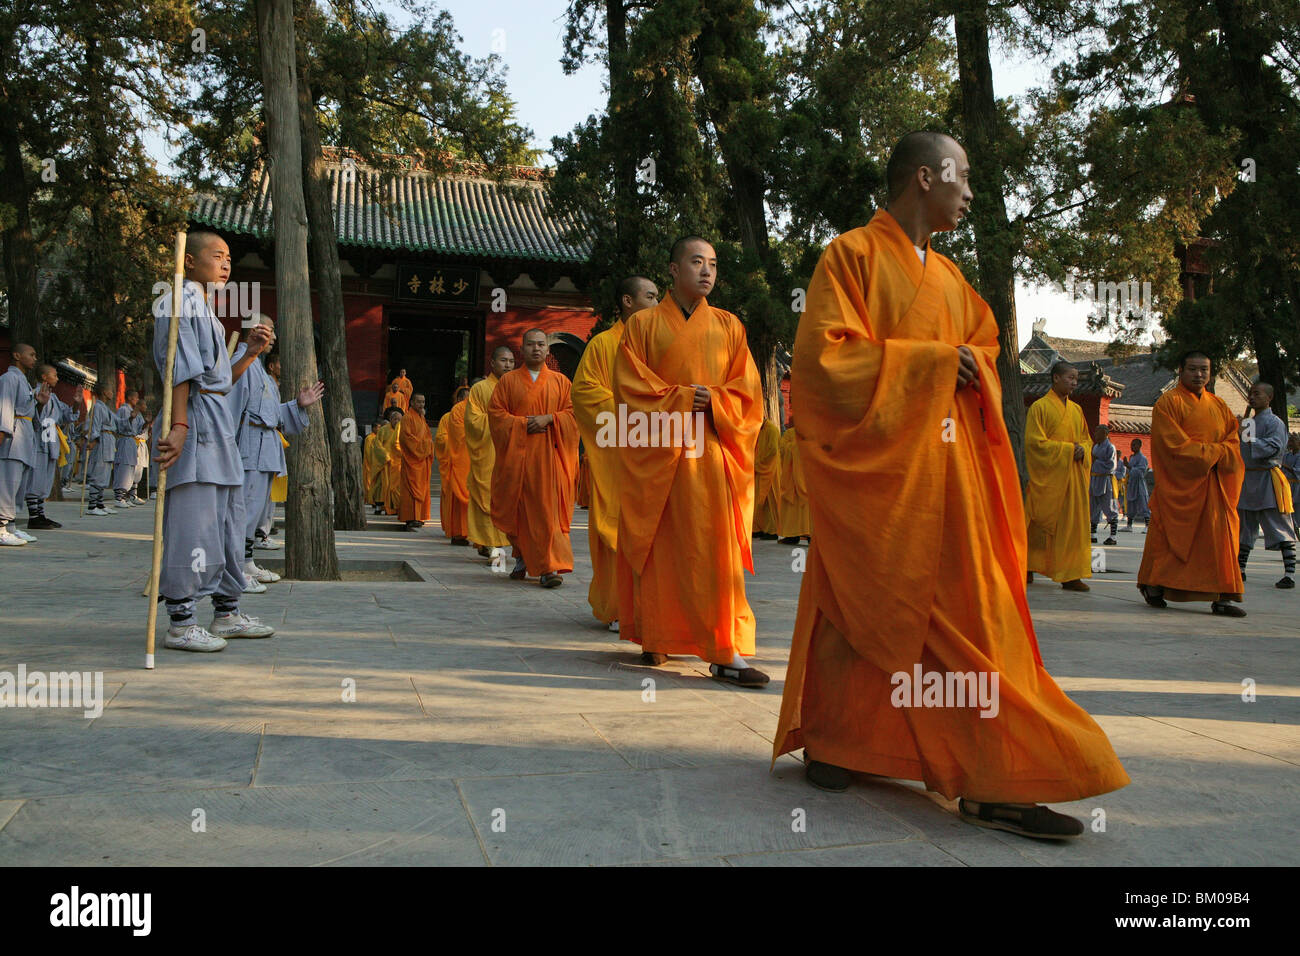 Shaolin Buddhist monk watches Kung Fu students, Shaolin Monastery, known for Shaolin boxing, Taoist Buddhist mountain, Song Shan Stock Photo